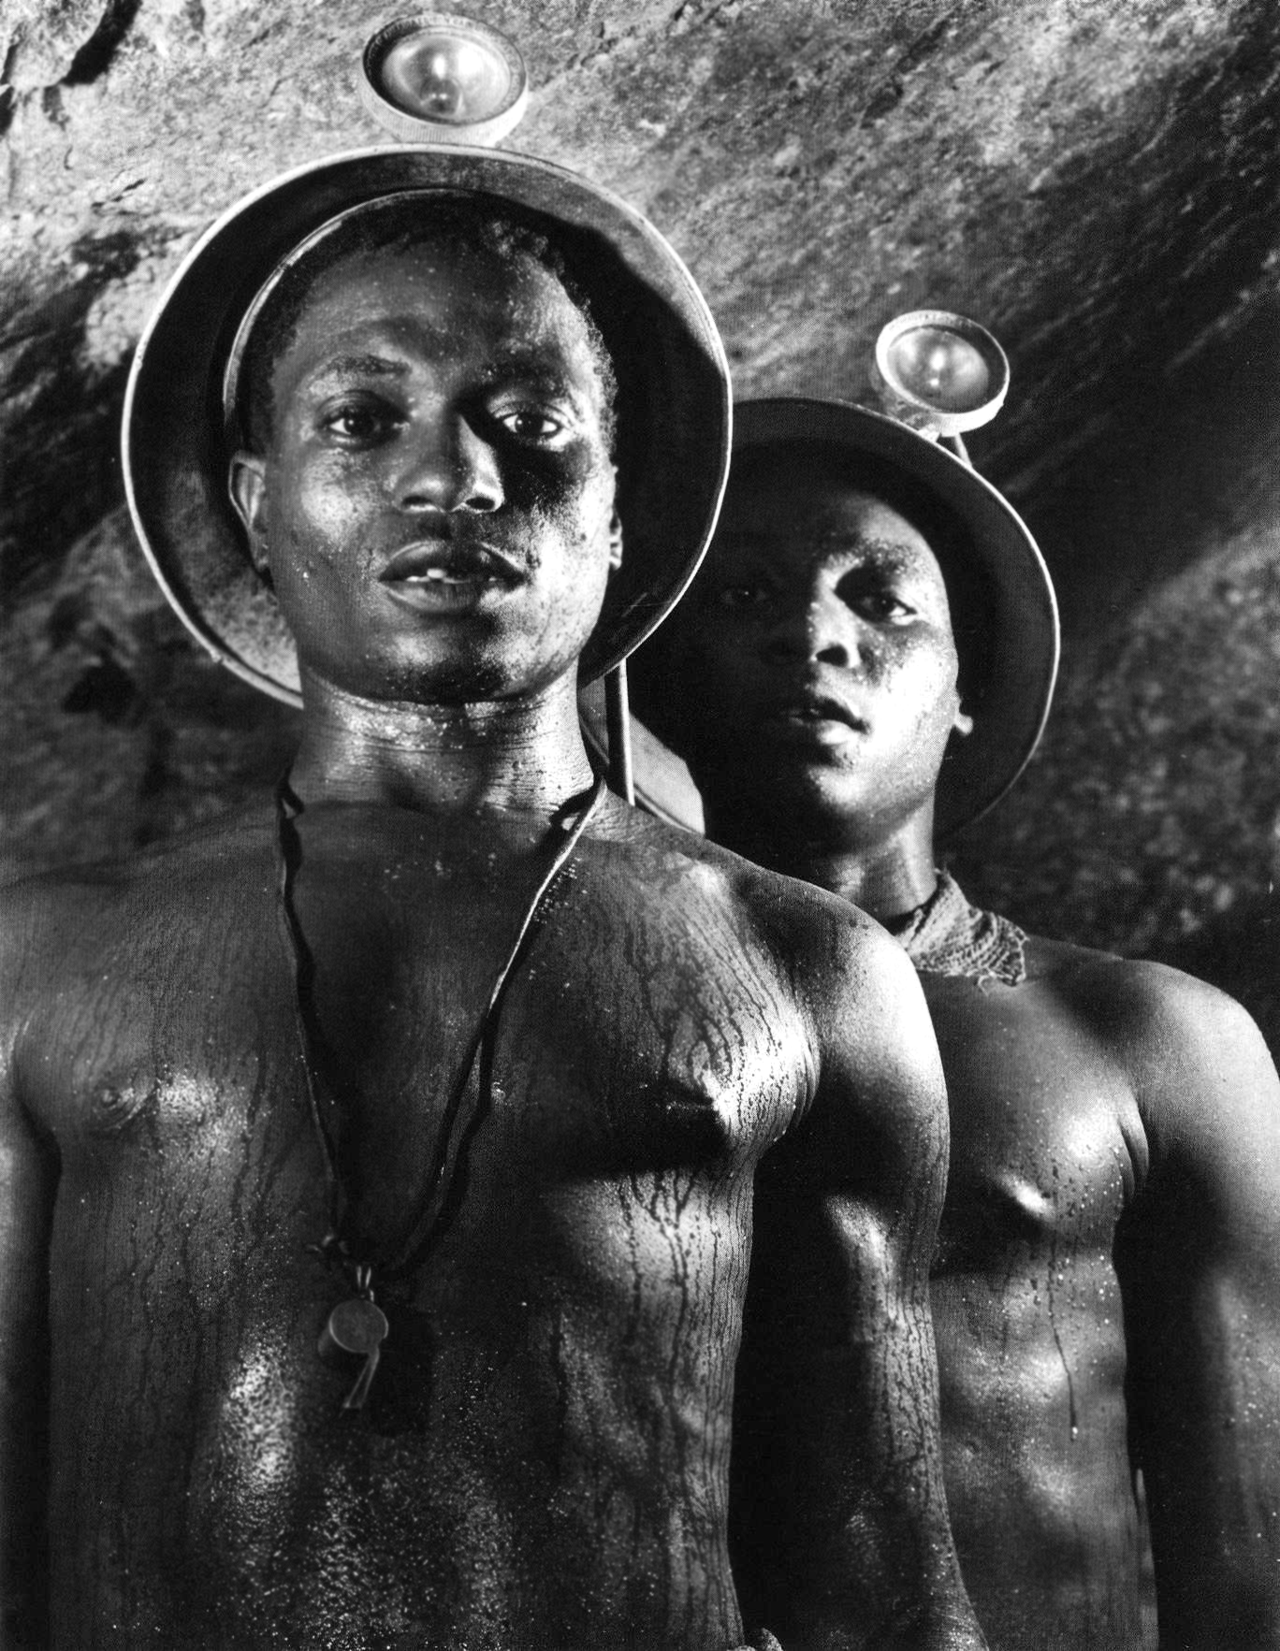 South African miners in 1950.